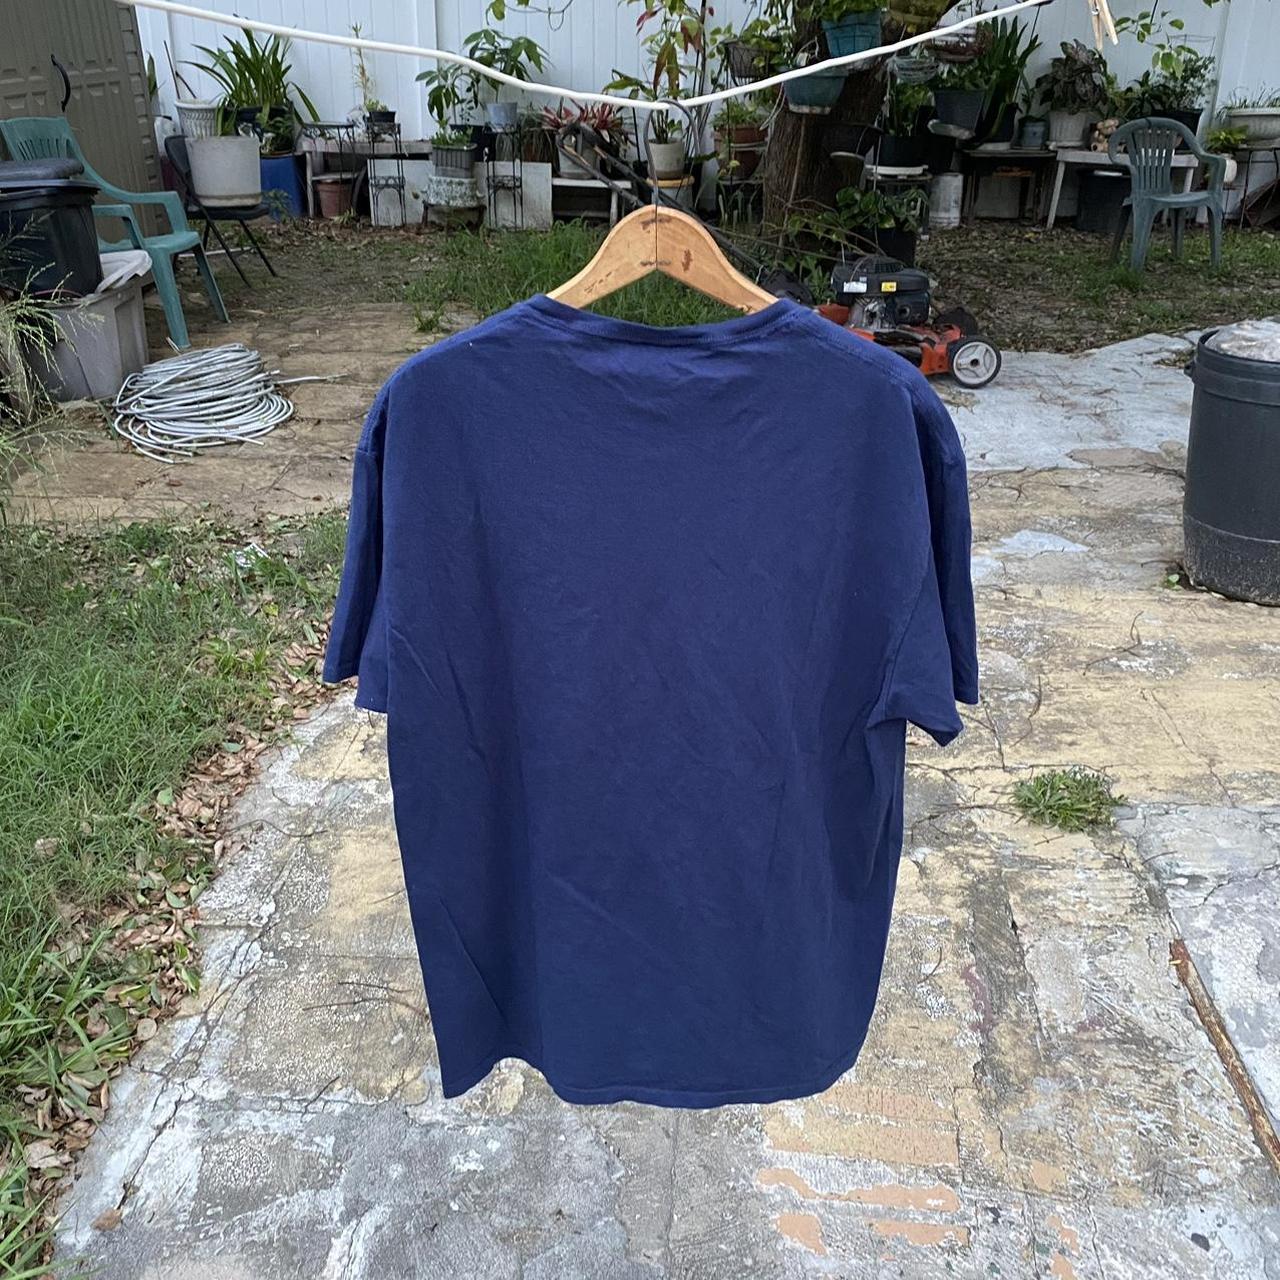 Fruit of the Loom Men's Navy and Red T-shirt (3)